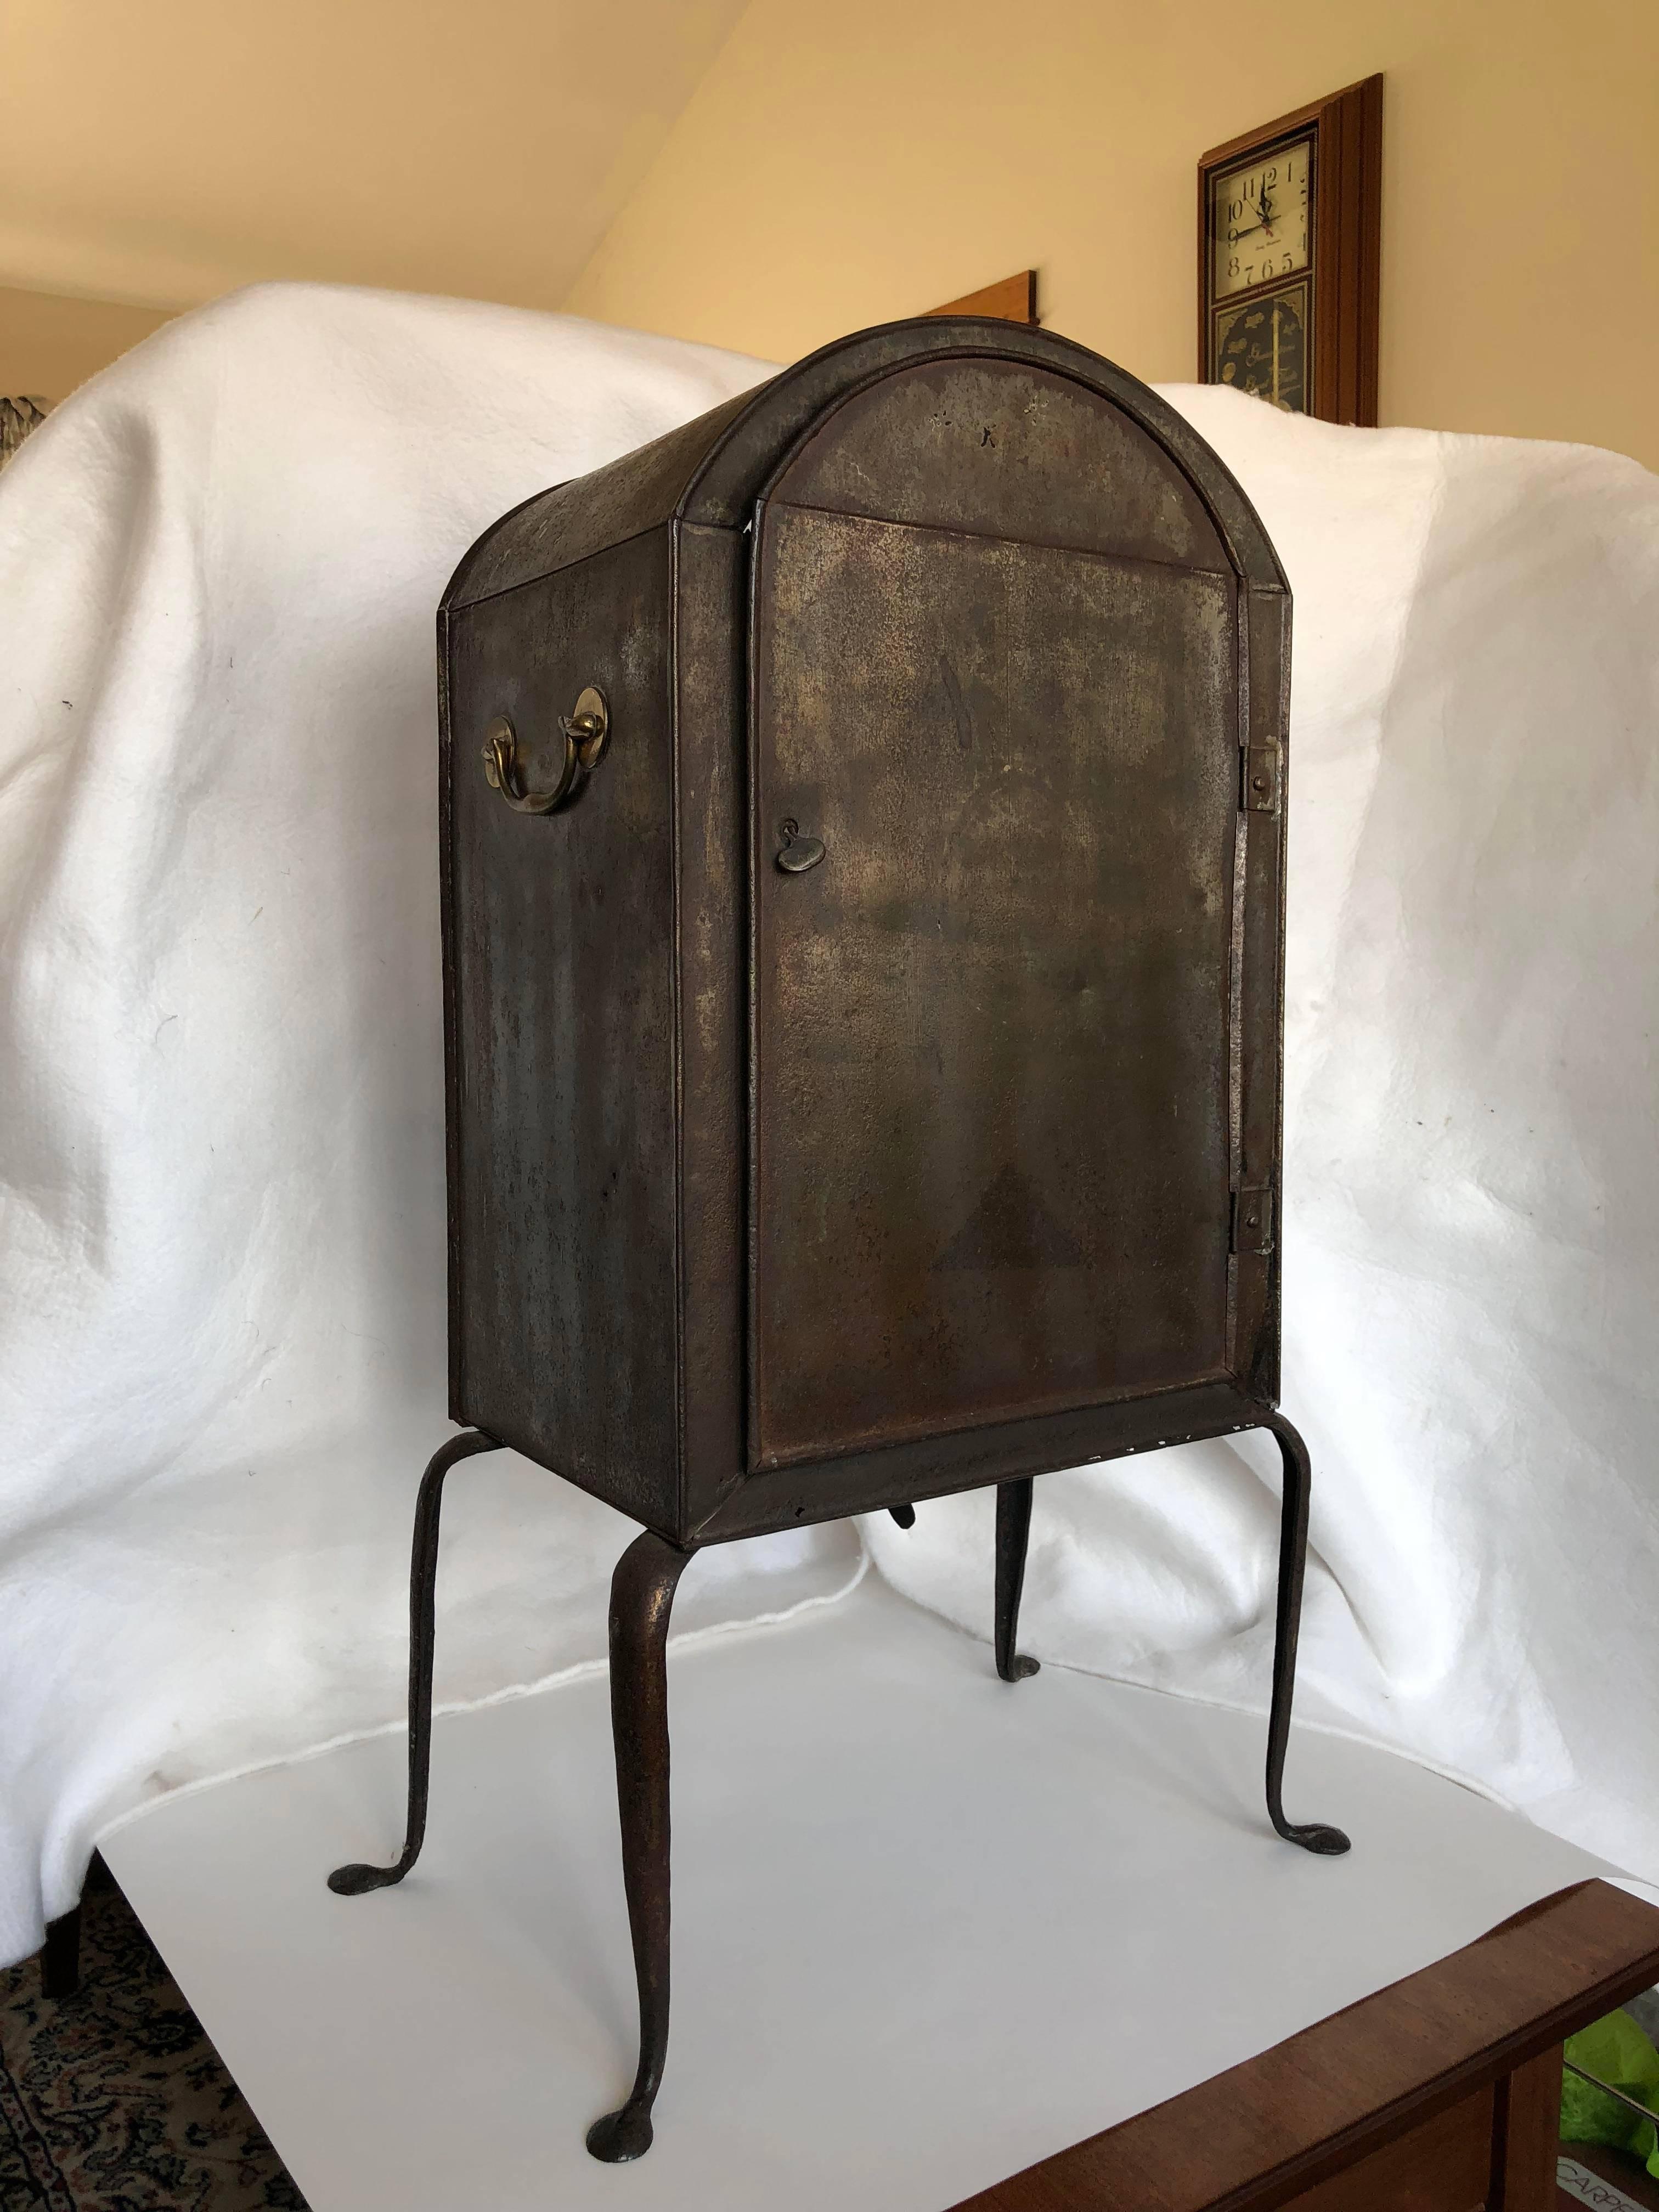 English Georgian period arch top plate warmer with brass handles, circa 1820. This piece would have originally been painted (tole), and is now polished metal.